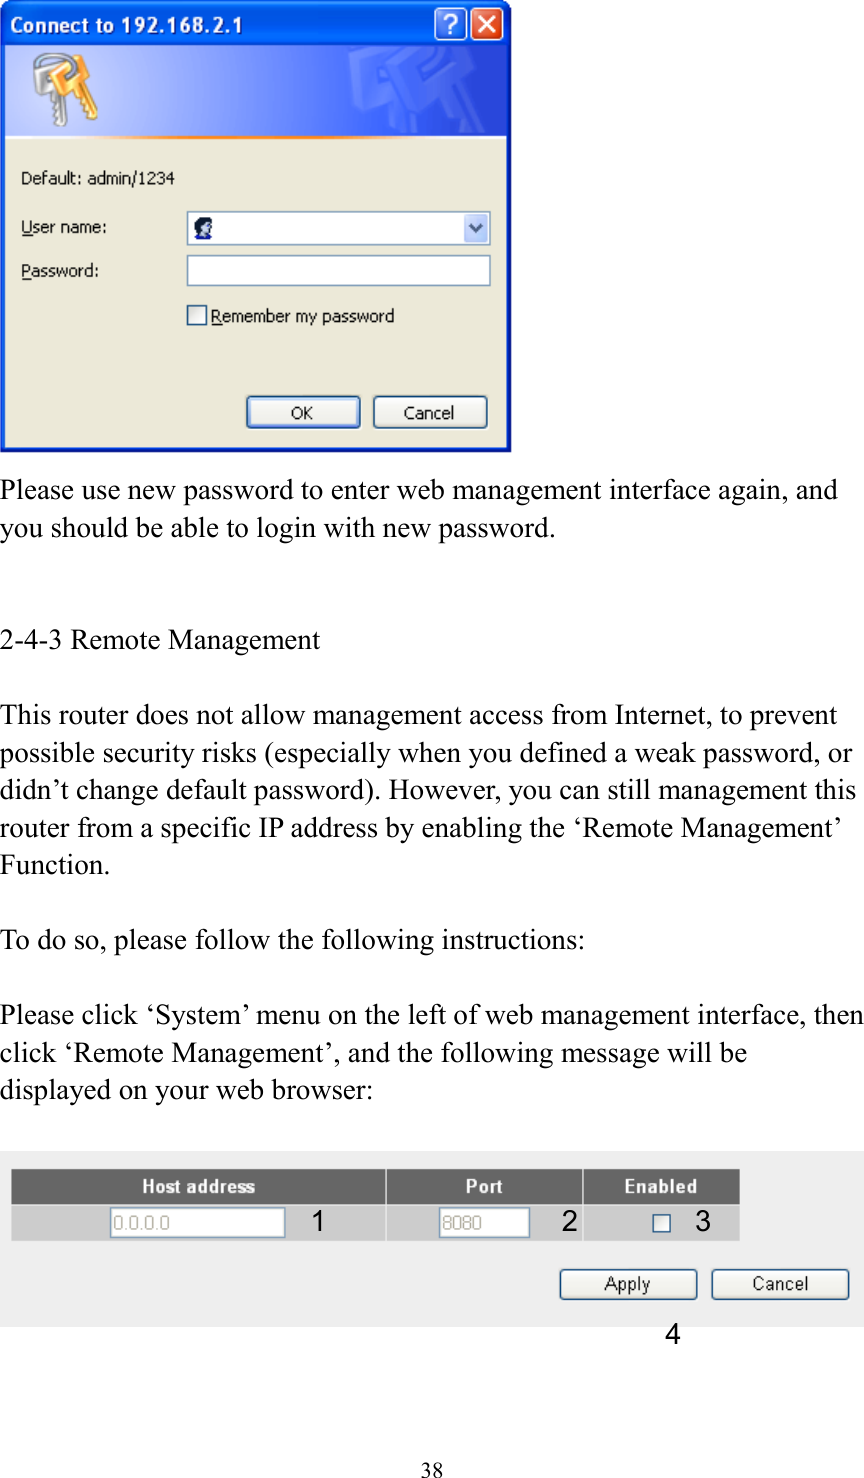 38  Please use new password to enter web management interface again, and you should be able to login with new password.   2-4-3 Remote Management  This router does not allow management access from Internet, to prevent possible security risks (especially when you defined a weak password, or didn’t change default password). However, you can still management this router from a specific IP address by enabling the ‘Remote Management’ Function.  To do so, please follow the following instructions:  Please click ‘System’ menu on the left of web management interface, then click ‘Remote Management’, and the following message will be displayed on your web browser:     1 2 3 4 